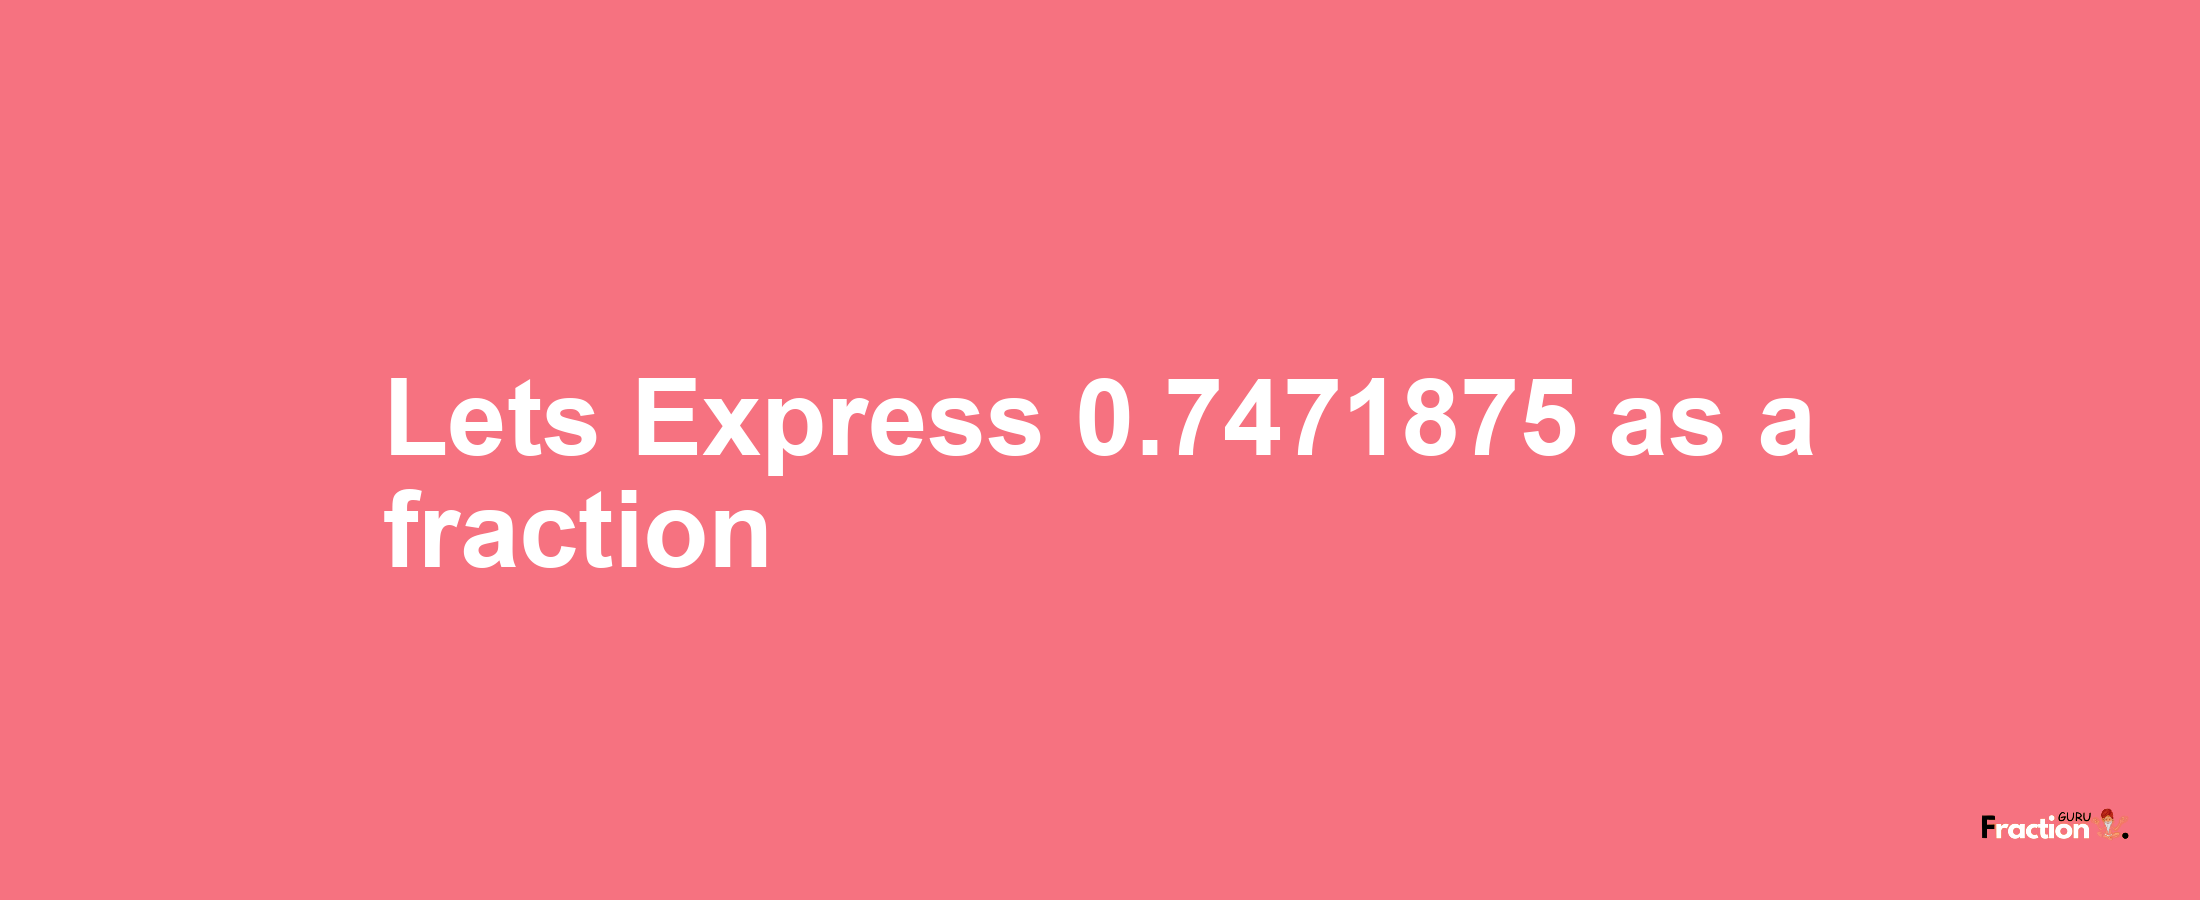 Lets Express 0.7471875 as afraction